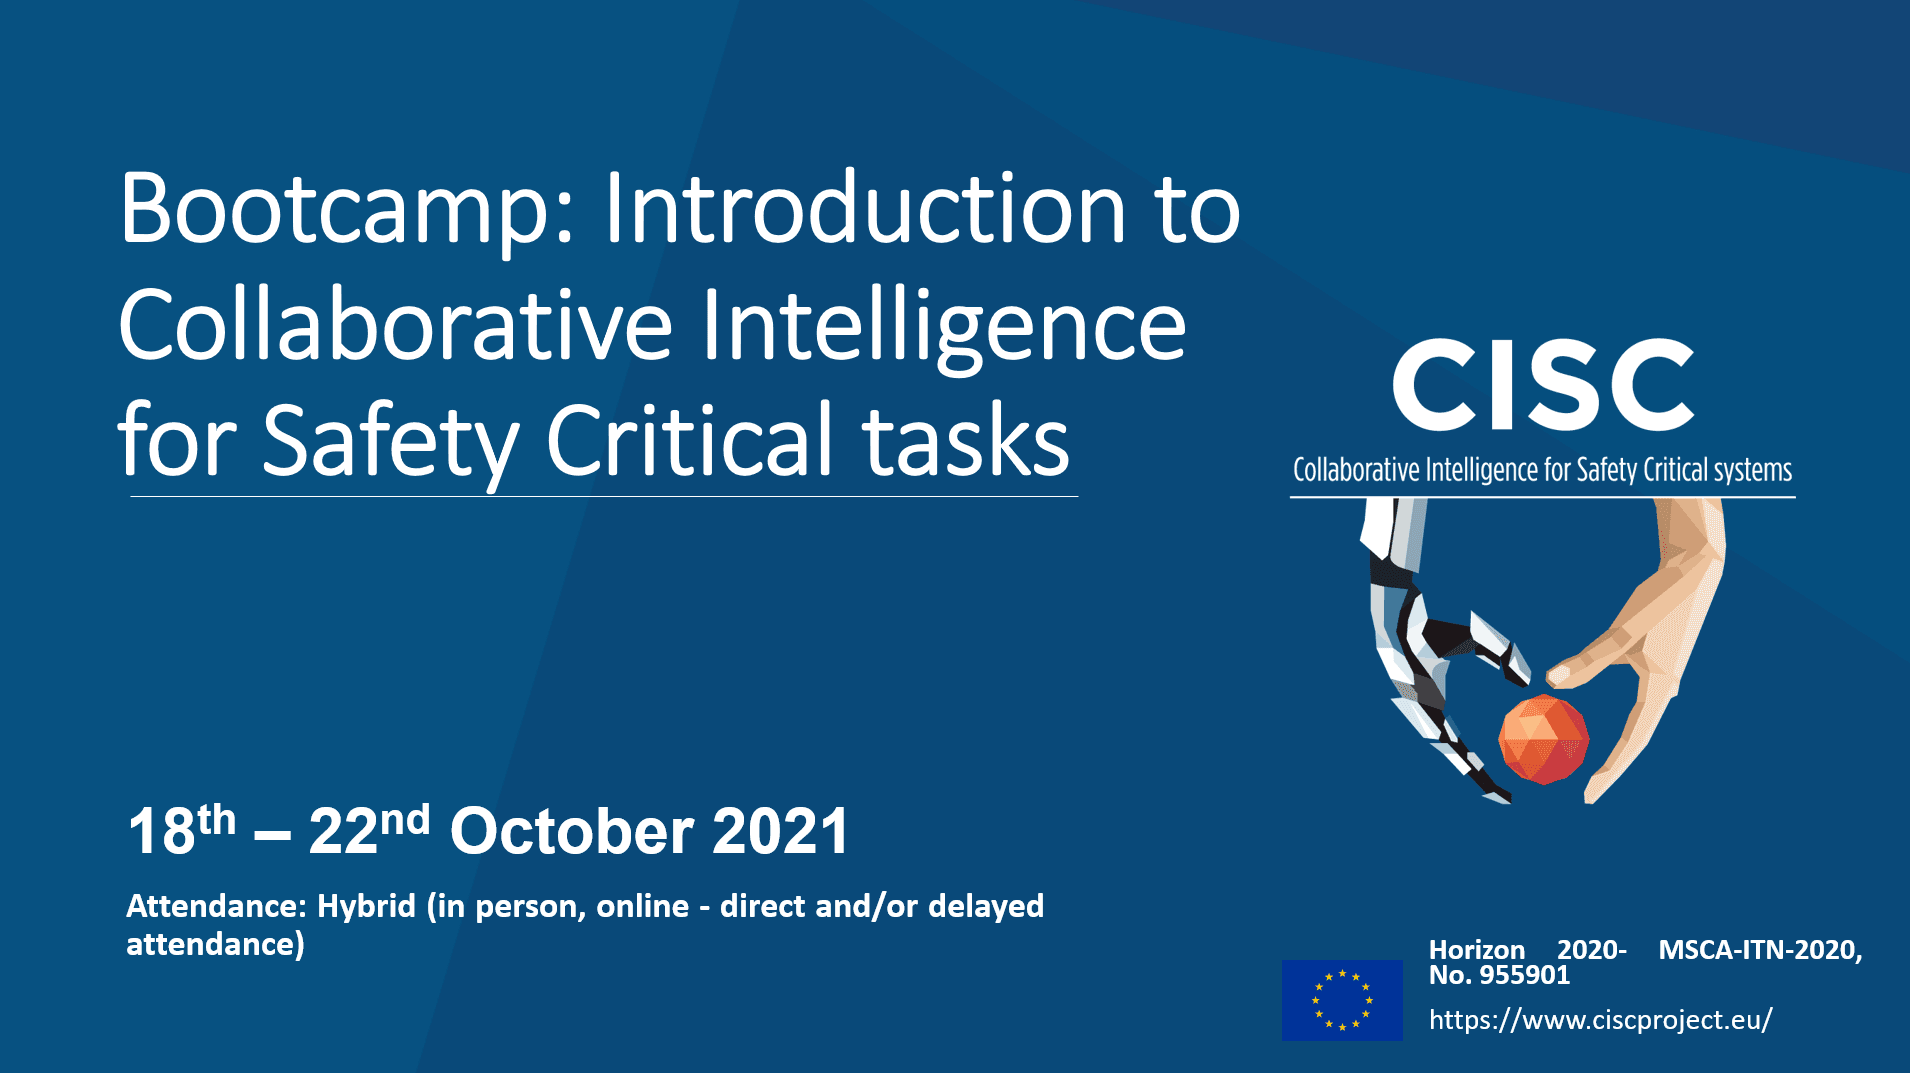 Bootcamp 2021 - Collaborative Intelligence for Safety Critical Systems